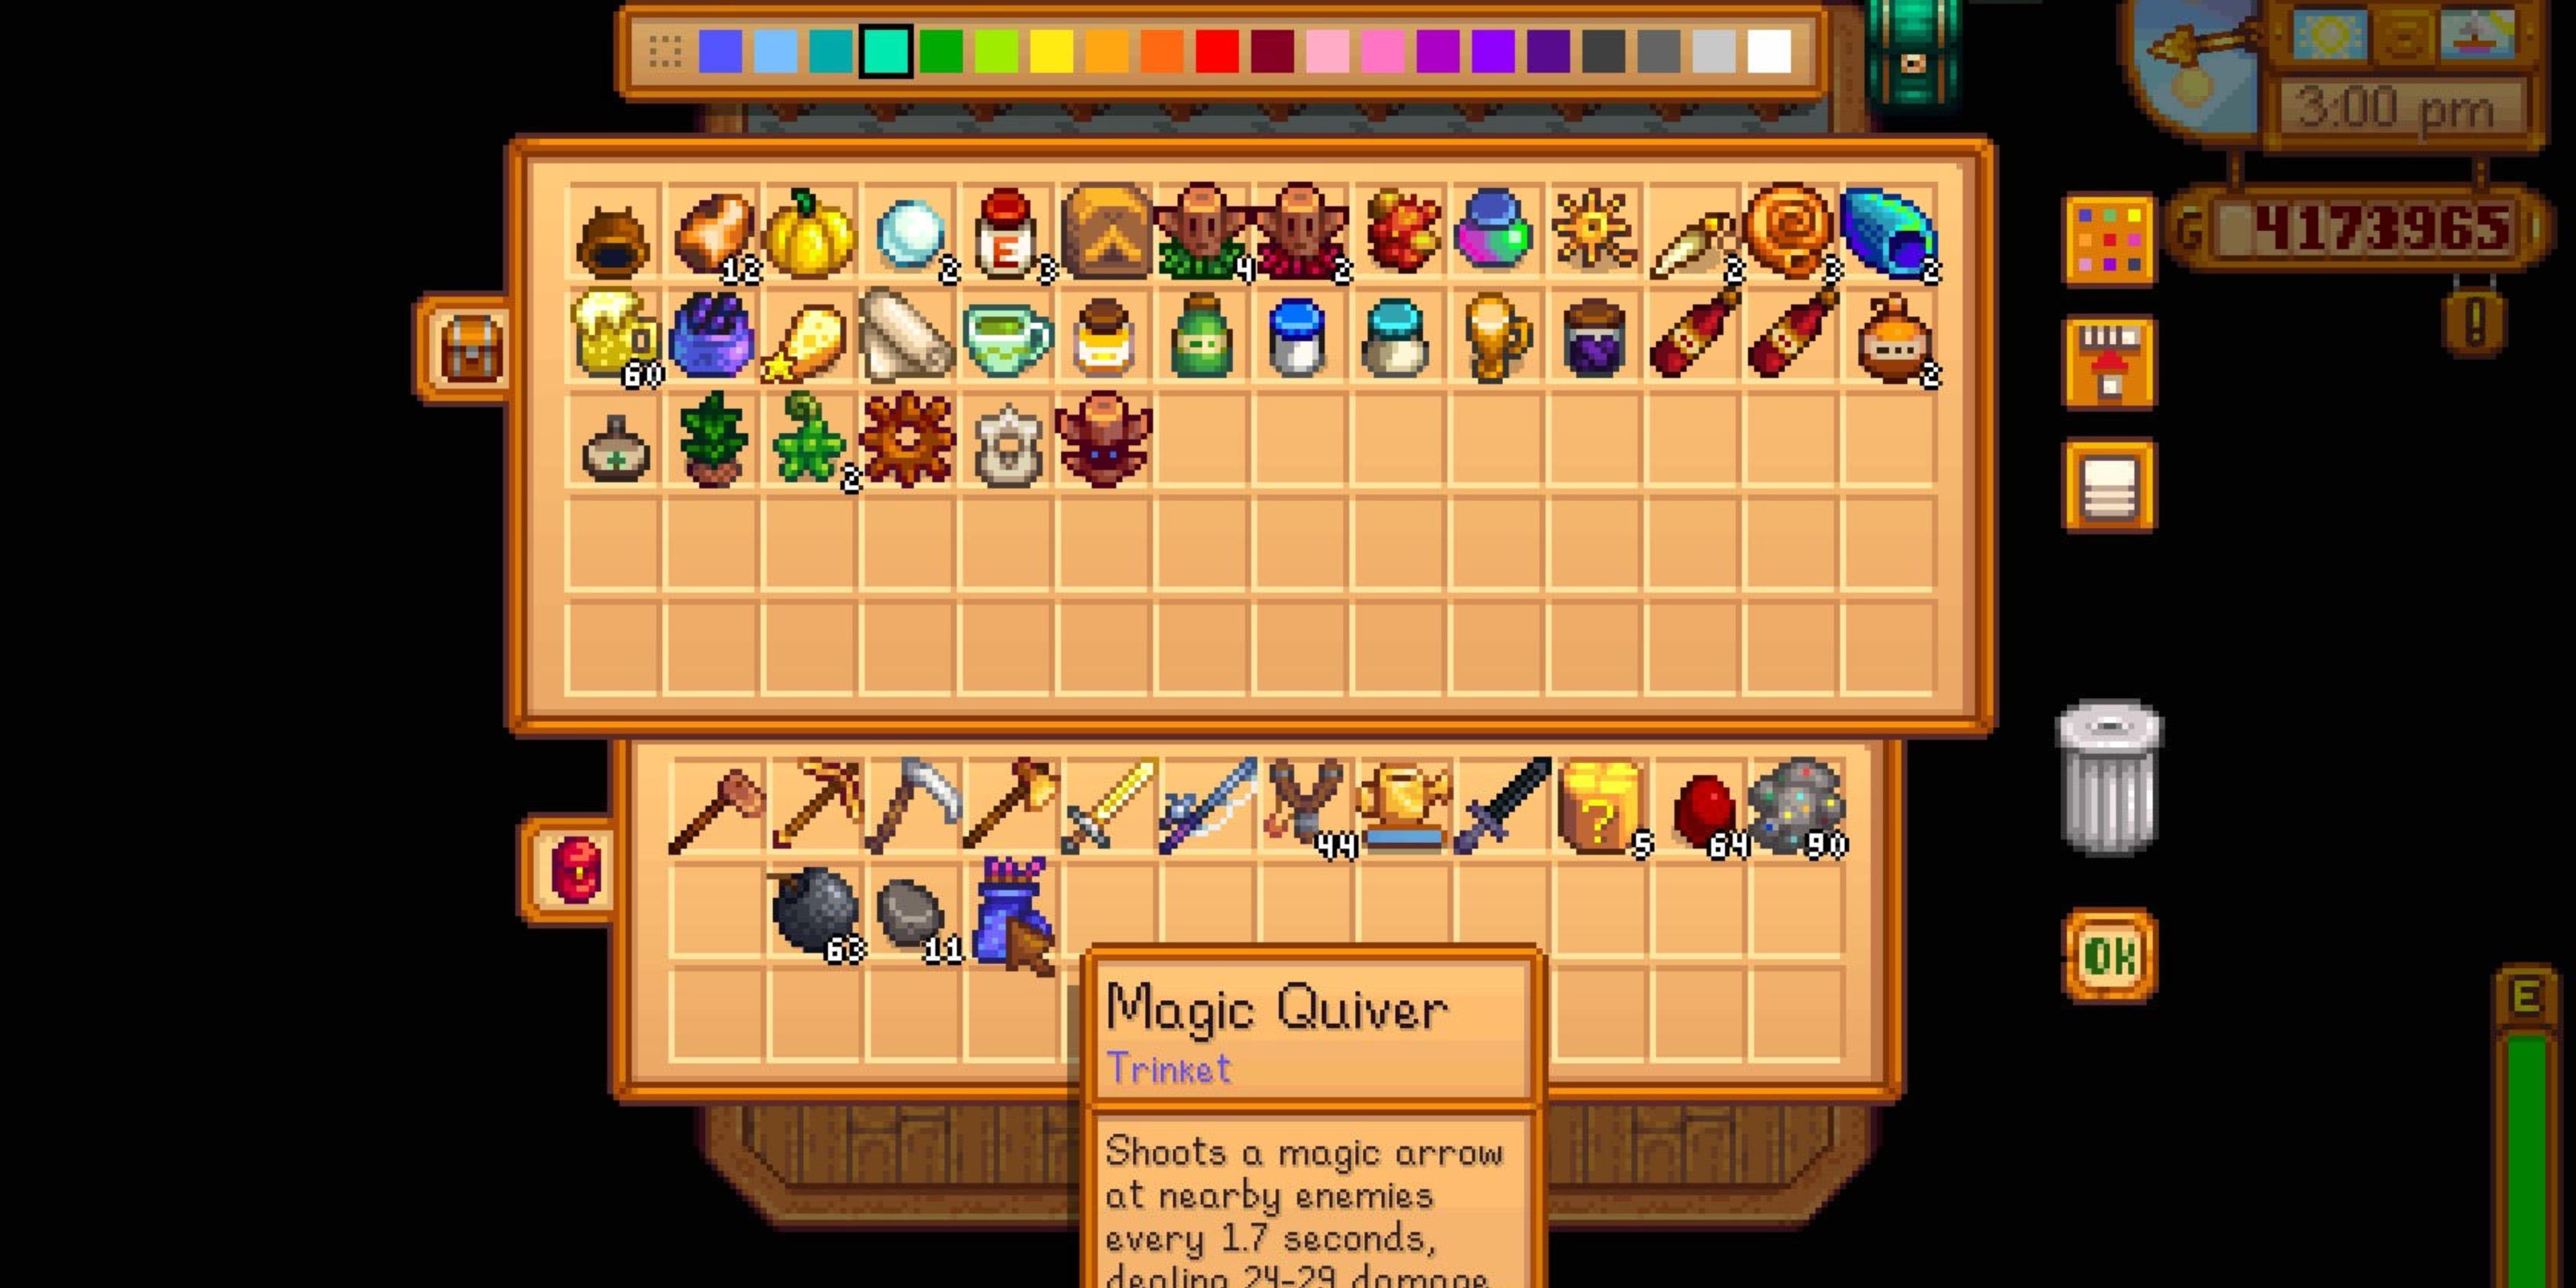 How to Get Magic Quiver